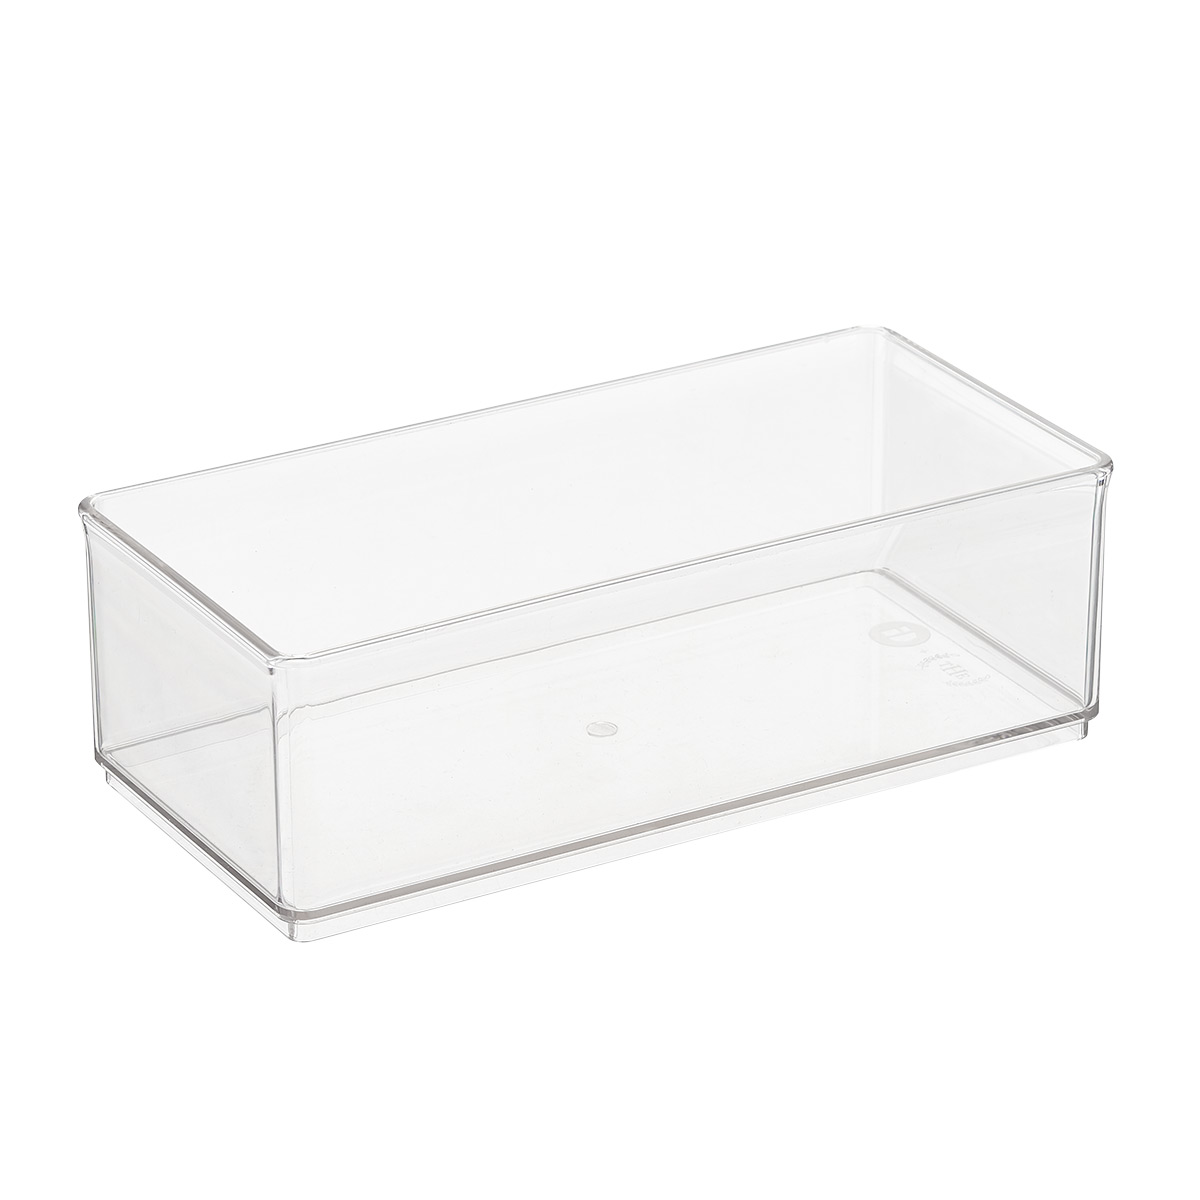 https://images.containerstore.com/catalogimages?sku=10077089